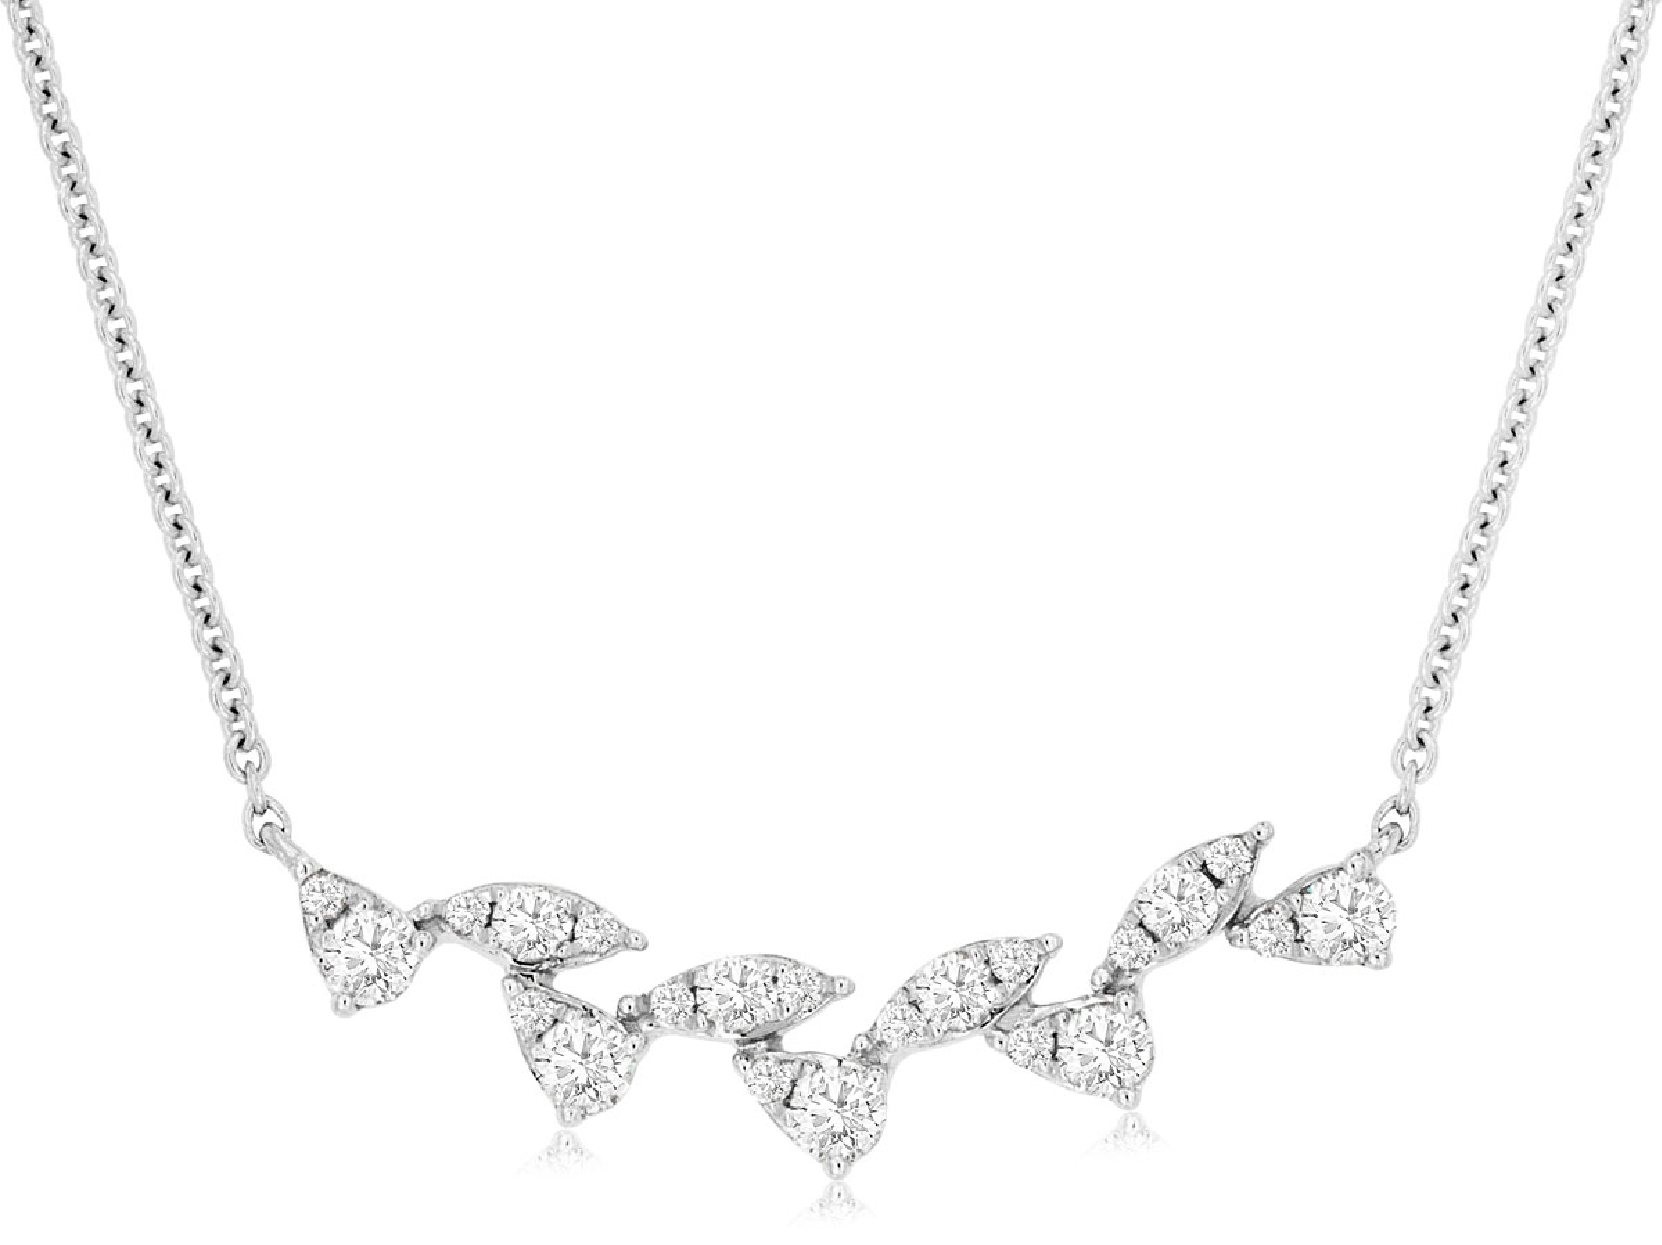 Diamond Leaf Necklace
0.35ct

16 Inches; Adjustable Length 